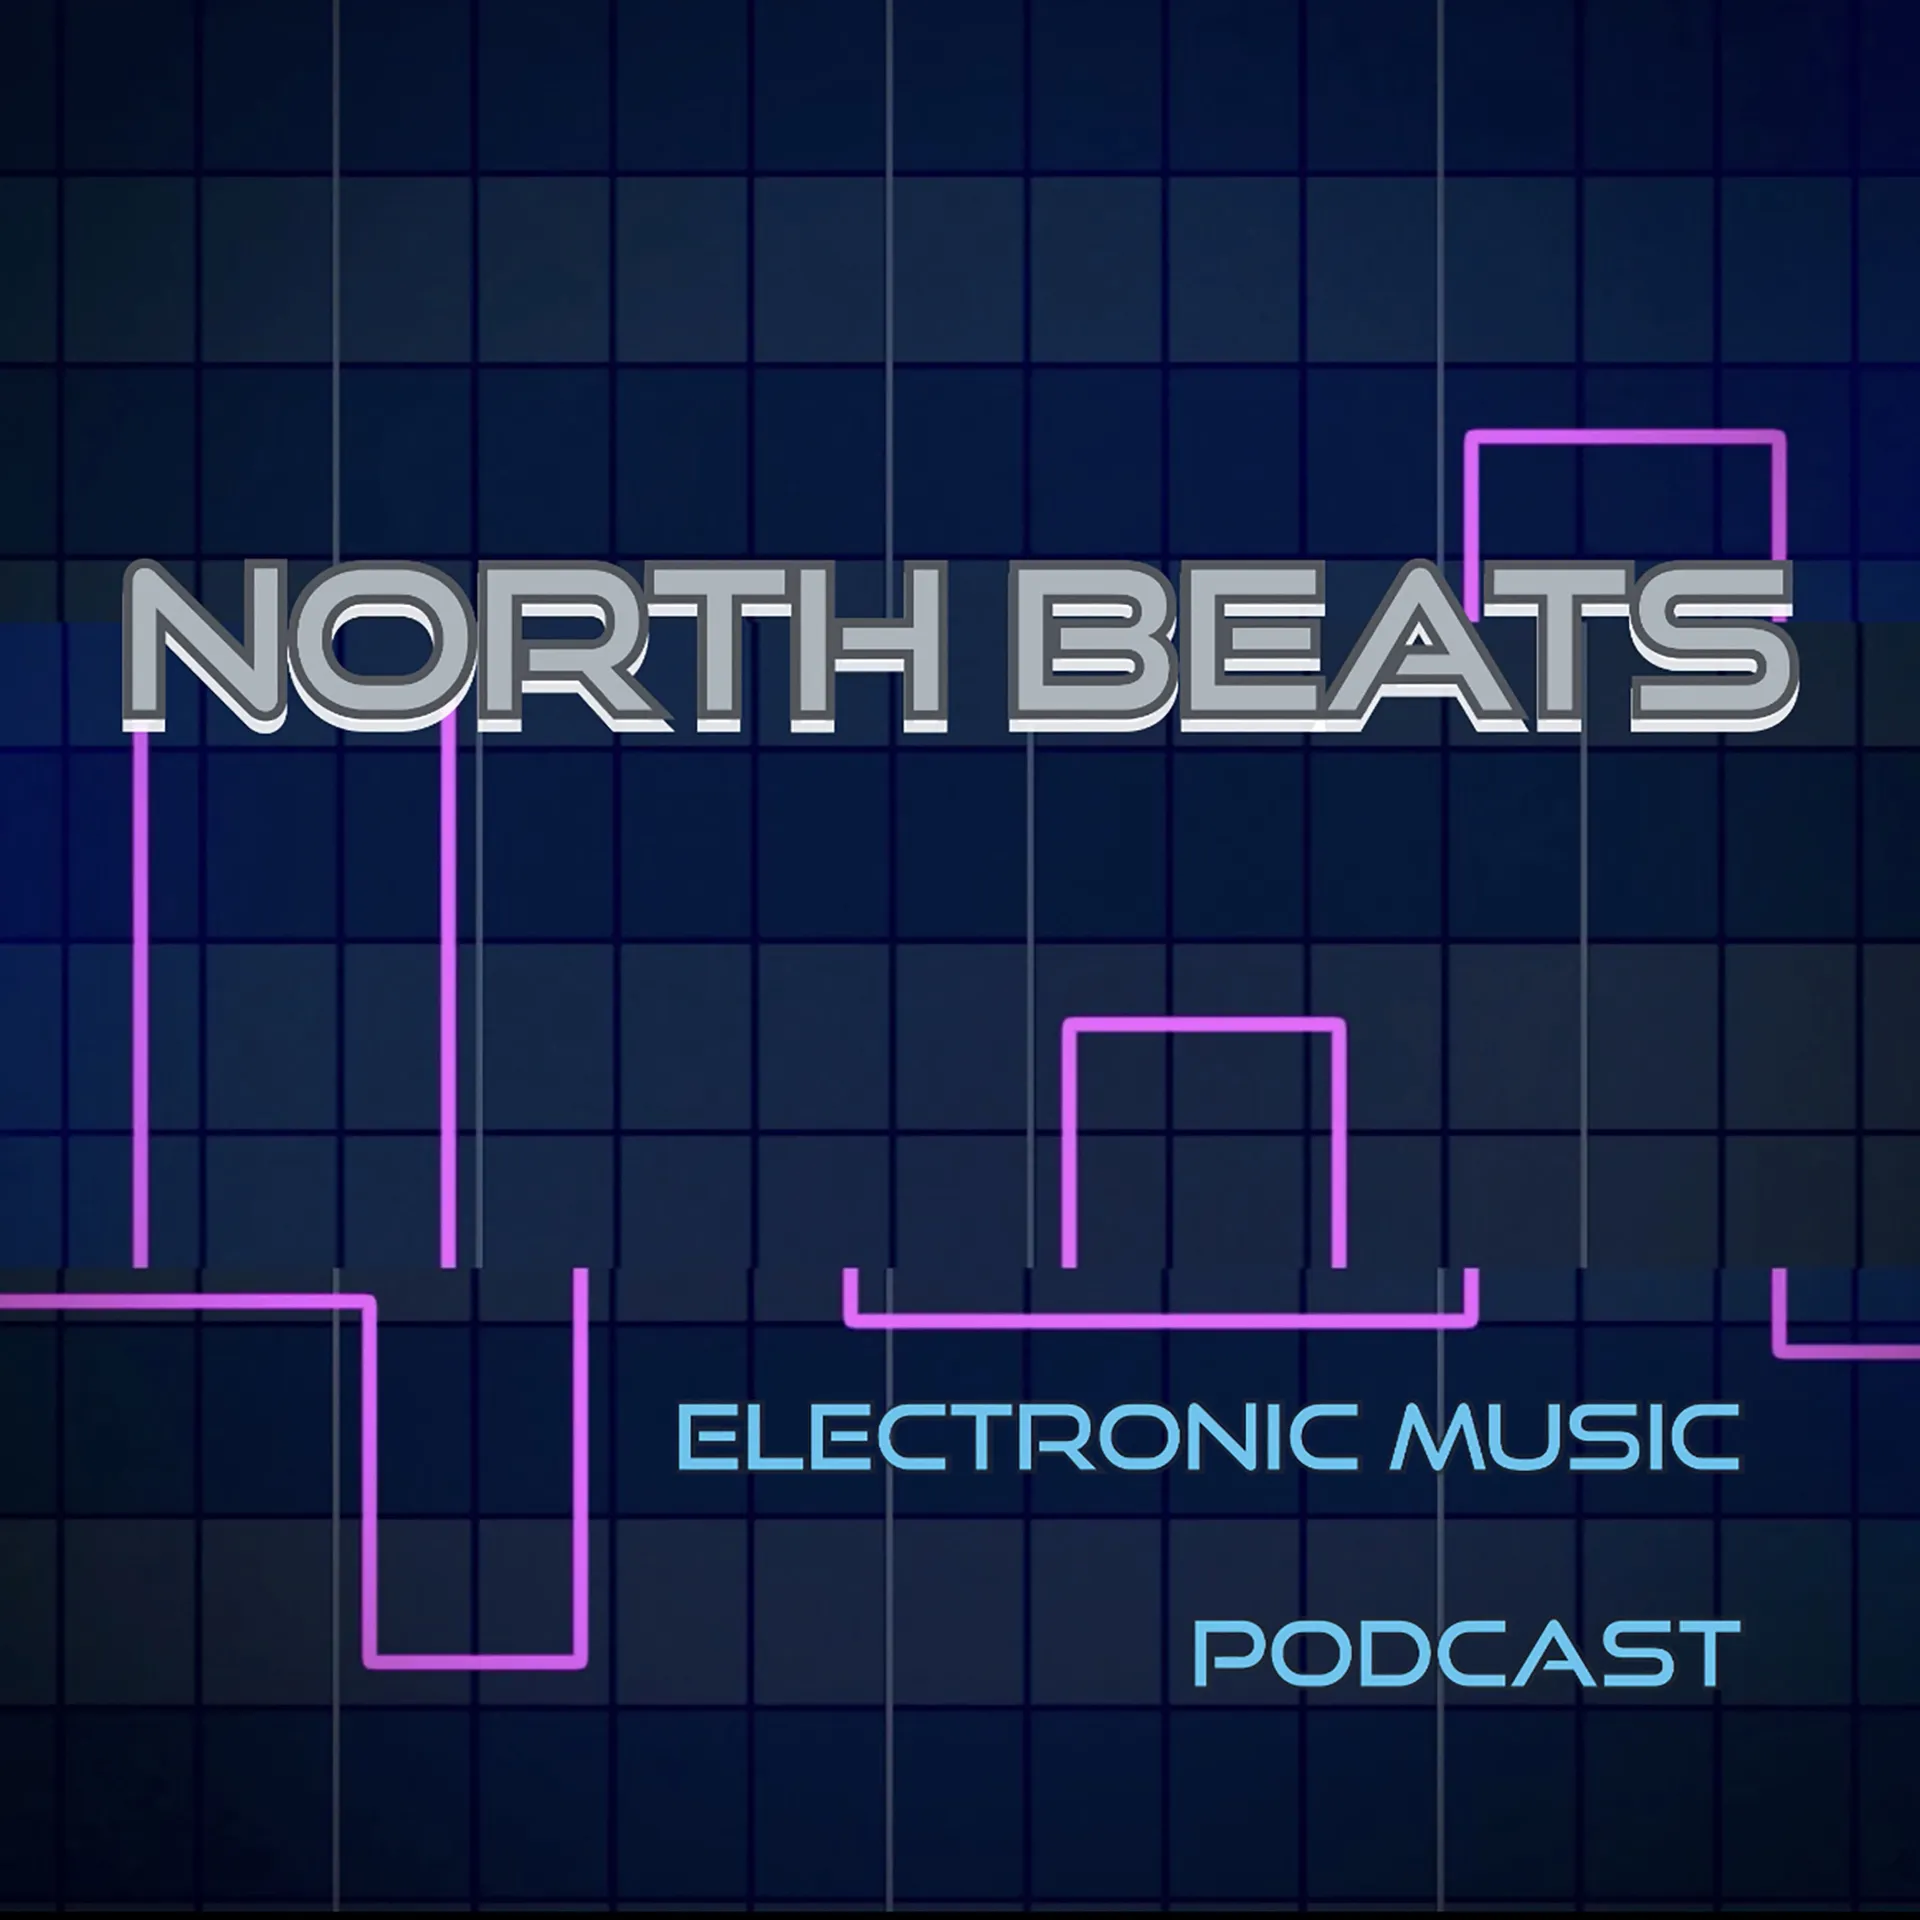 Drew Waters interview on North Beats podcast